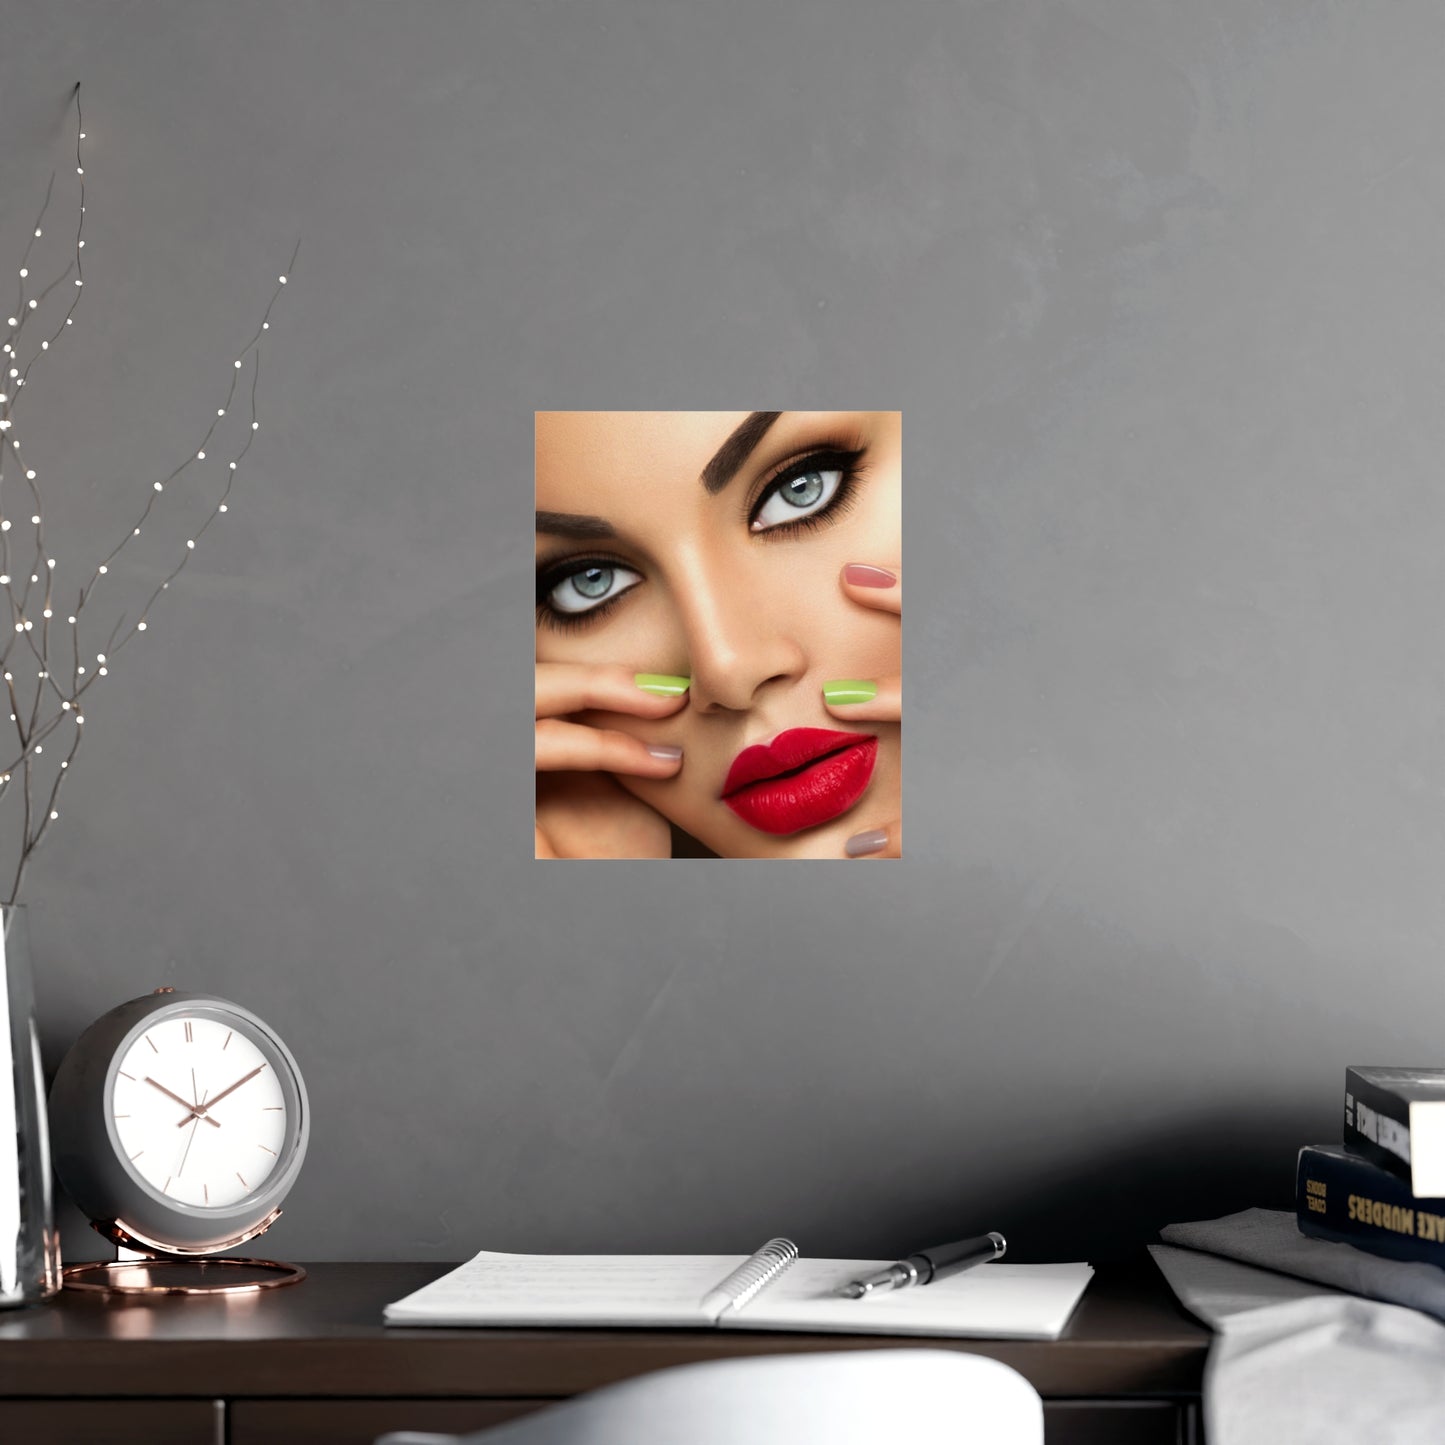 Posters - Sexy Lips - Vertical Matte Posters - 26